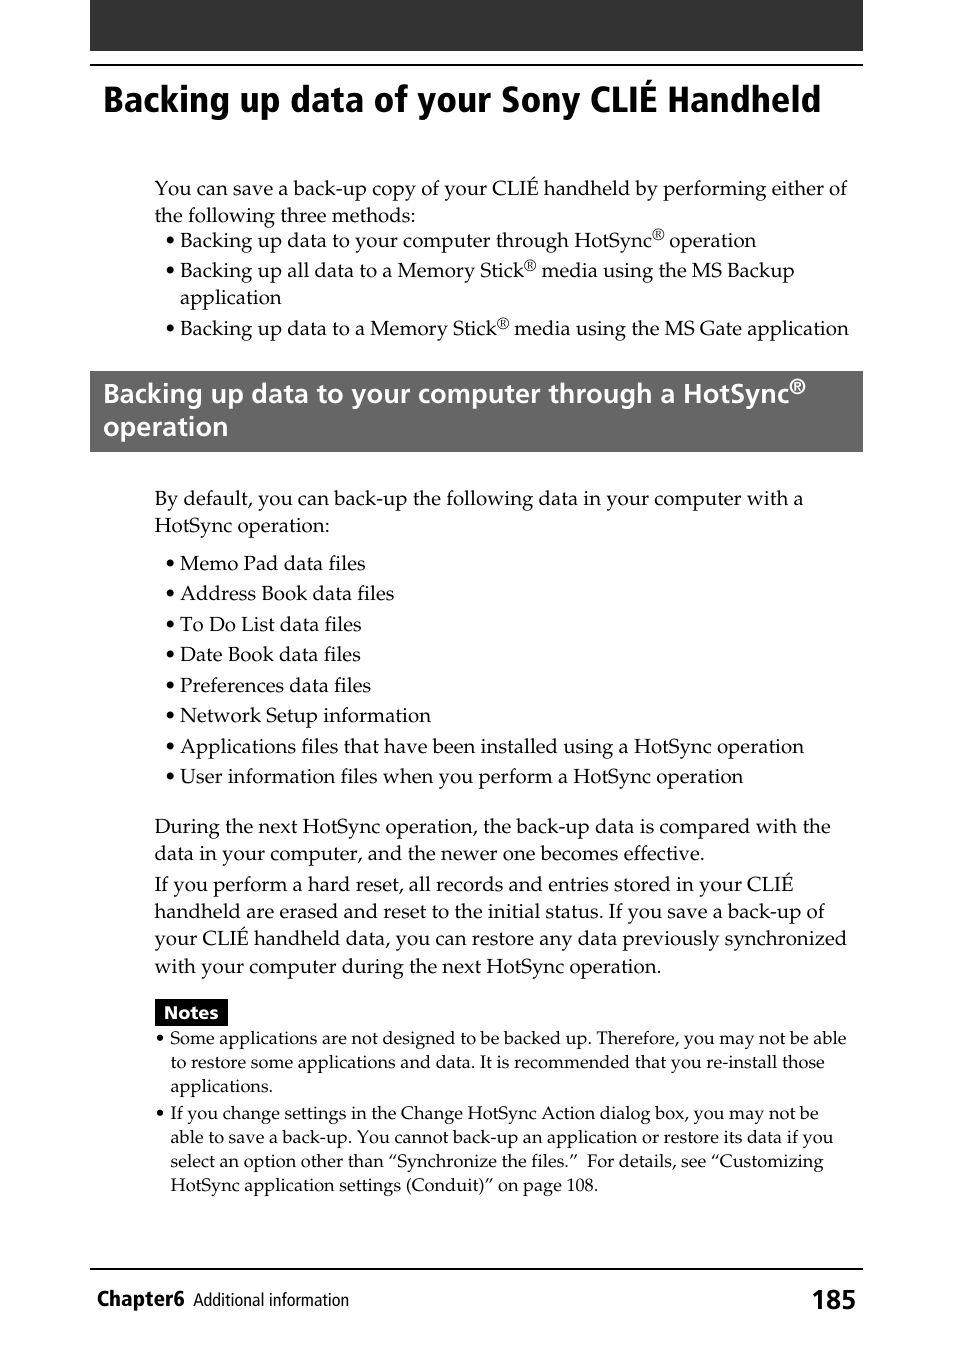 Backing up data of your sony clié handheld, Backing up data to your computer through a hotsync, Operation | Sony PEG-T415G User Manual | Page 185 / 220